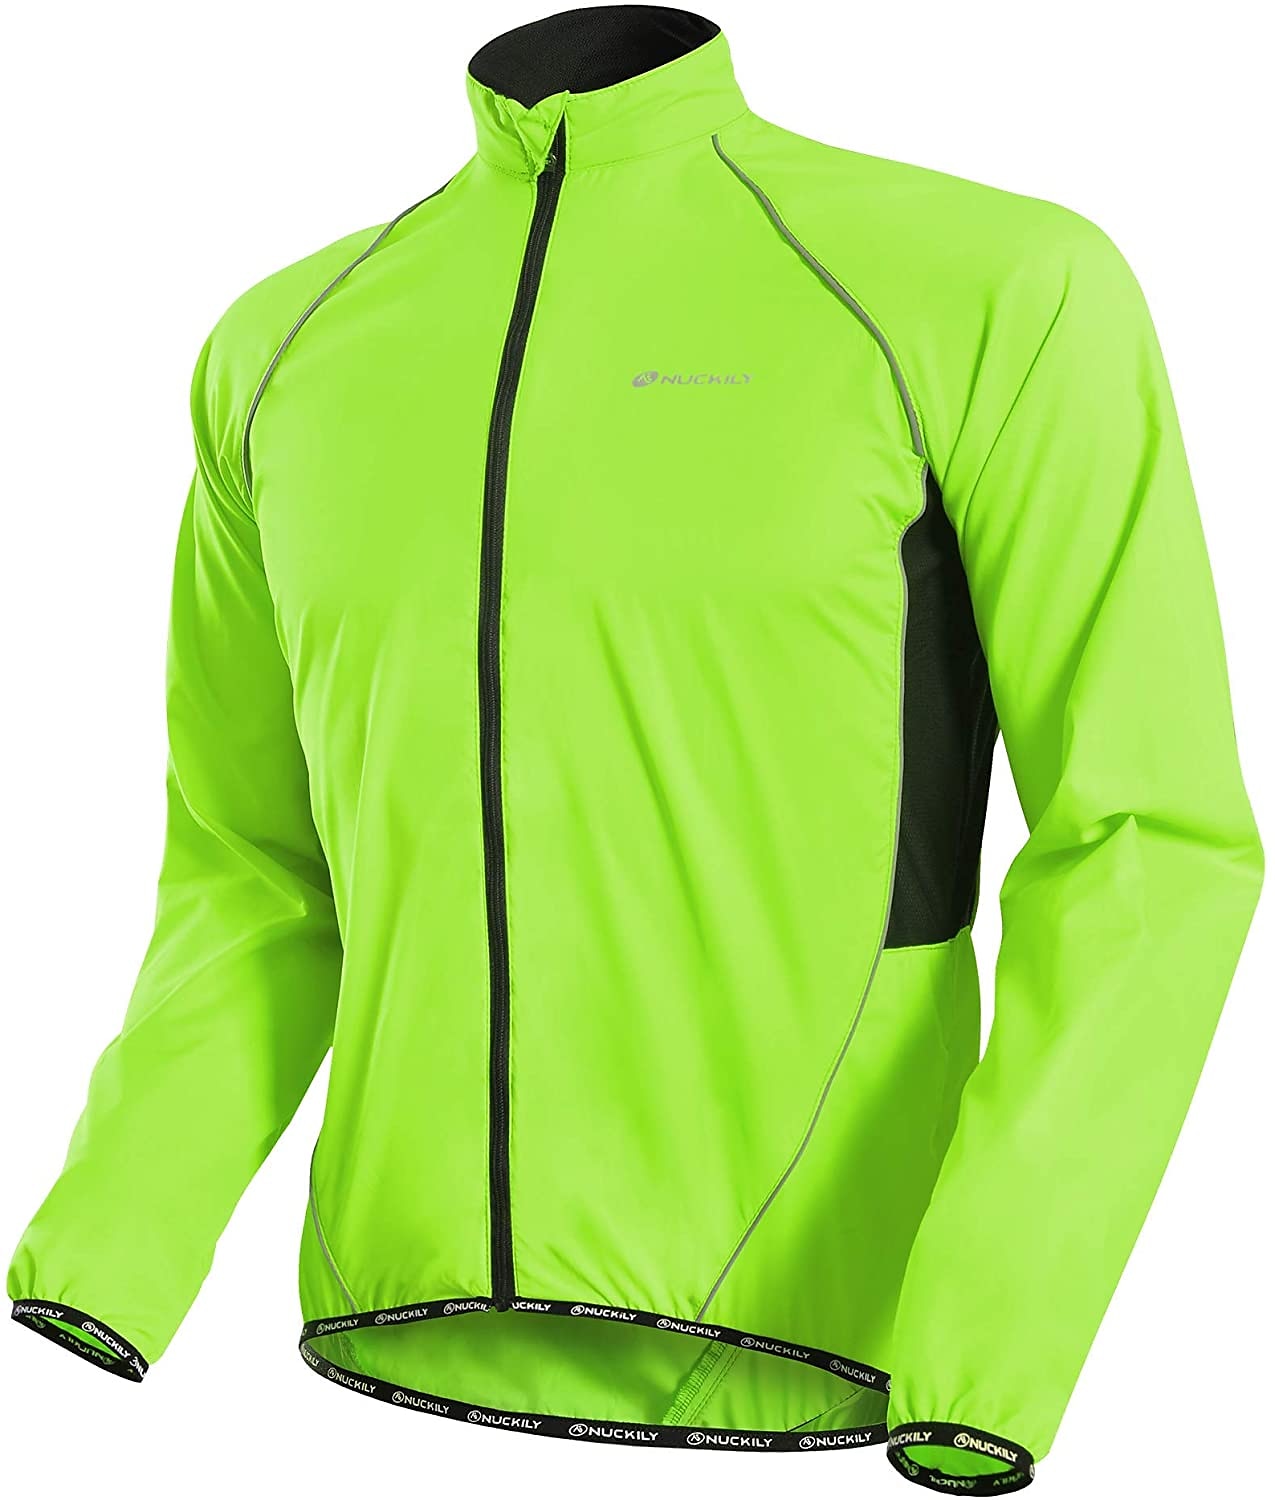 Mens Adult Jackets & Gilets | Avon Valley Cyclery